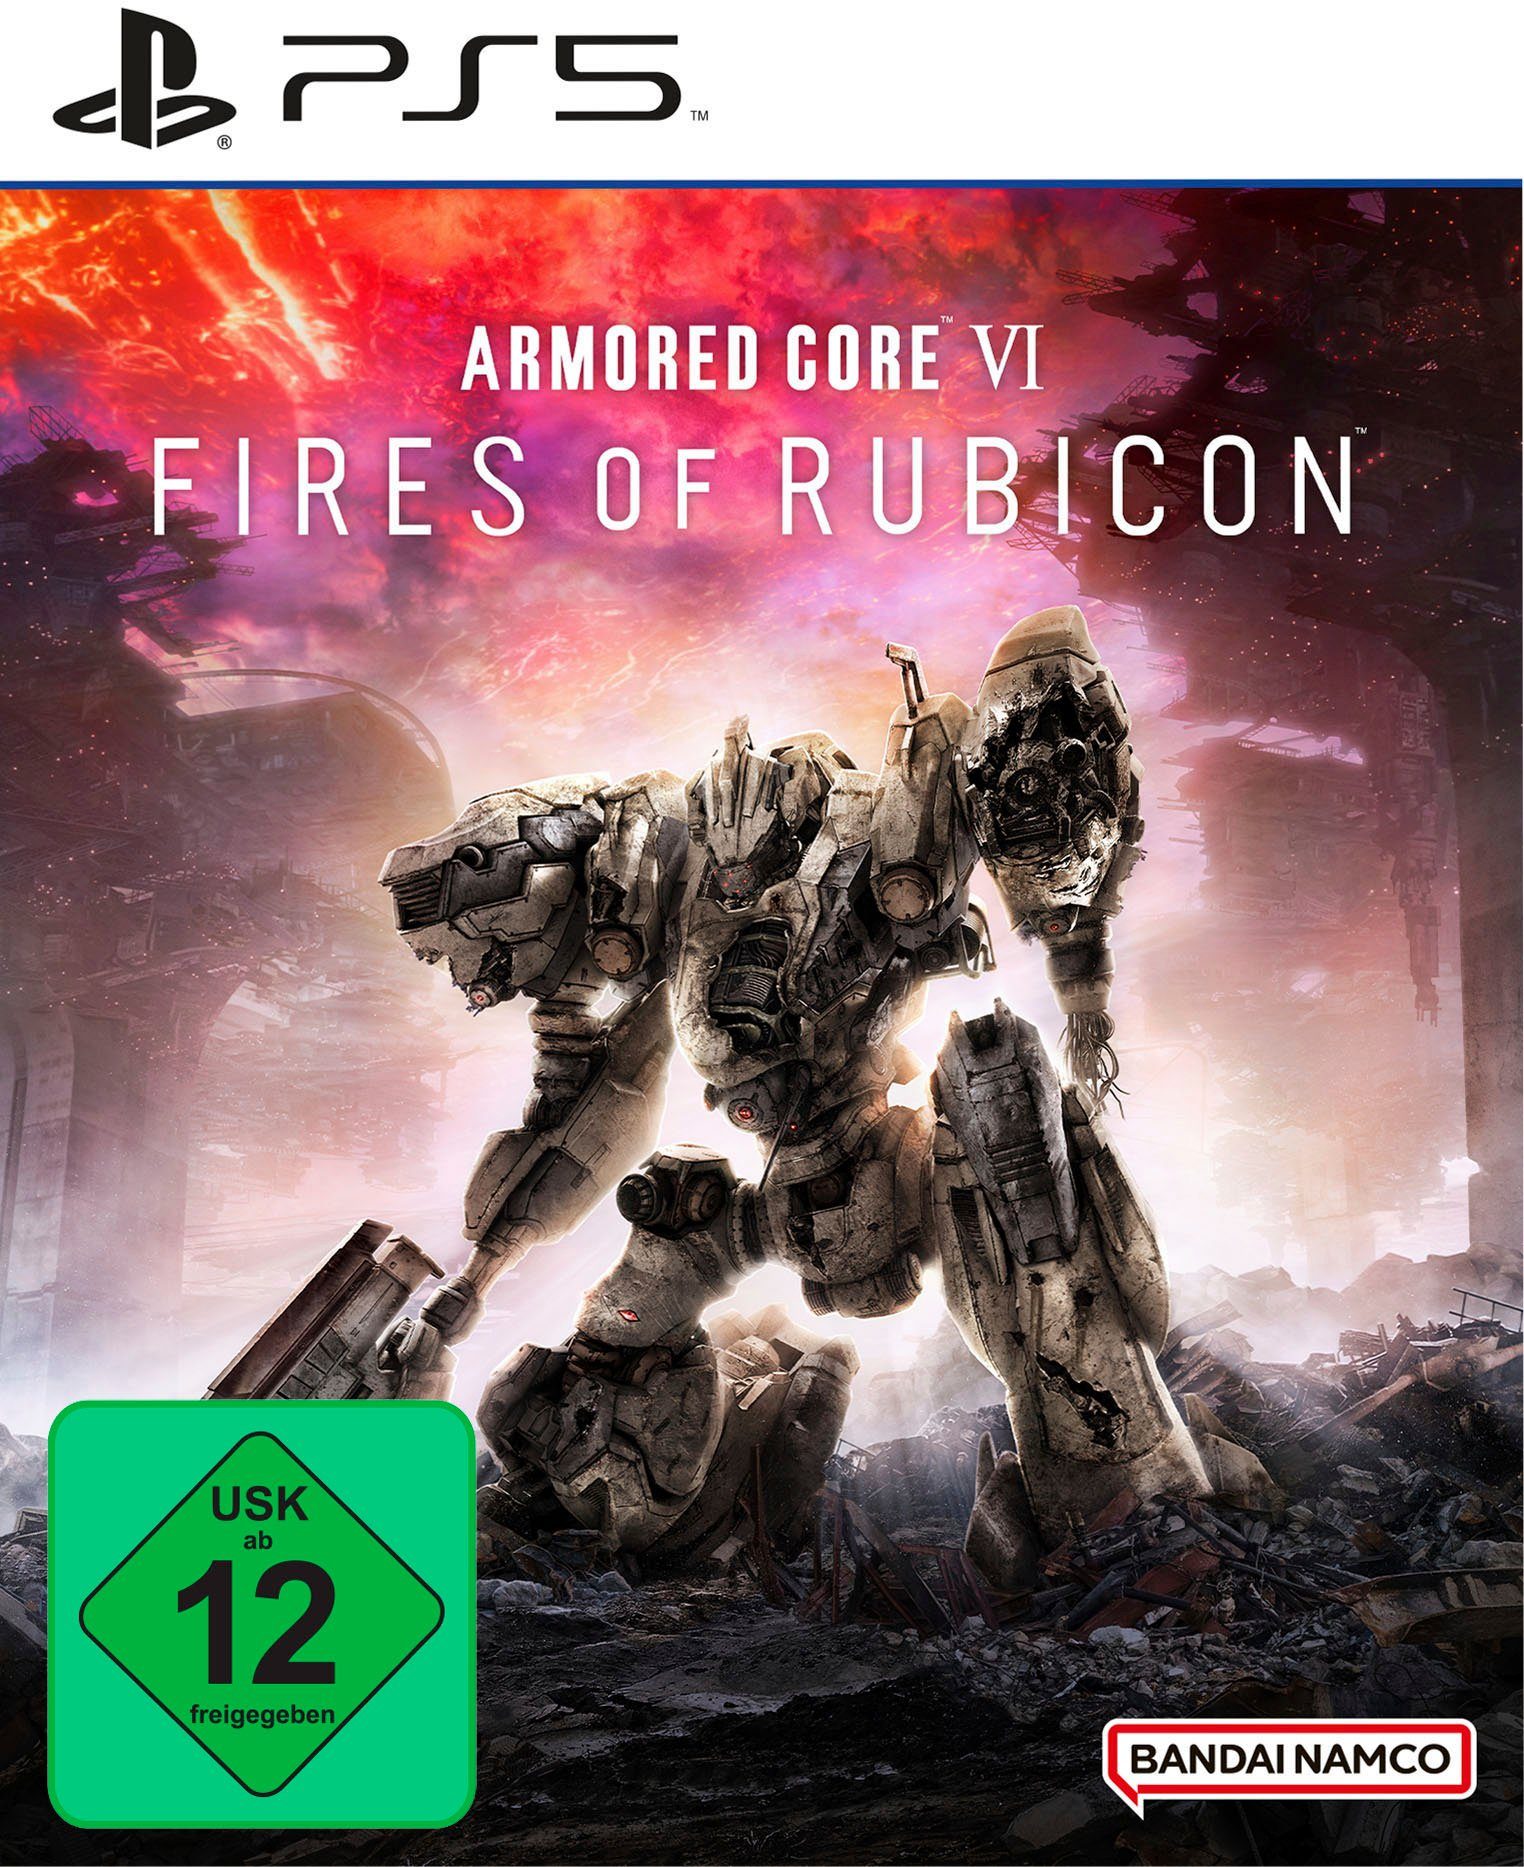 Bandai Armored Core VI Fires of Rubicon Launch Edition PlayStation 5